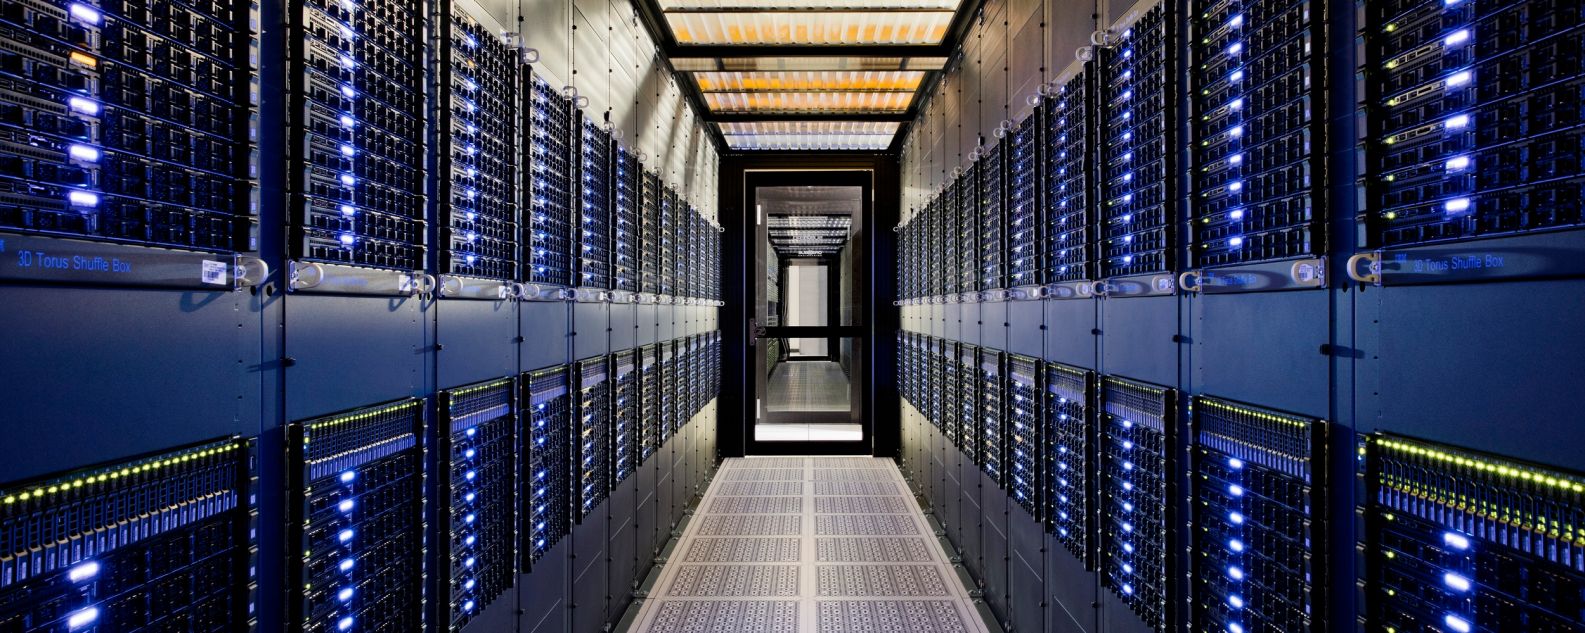  Open server rack cabinets in a Big Data center